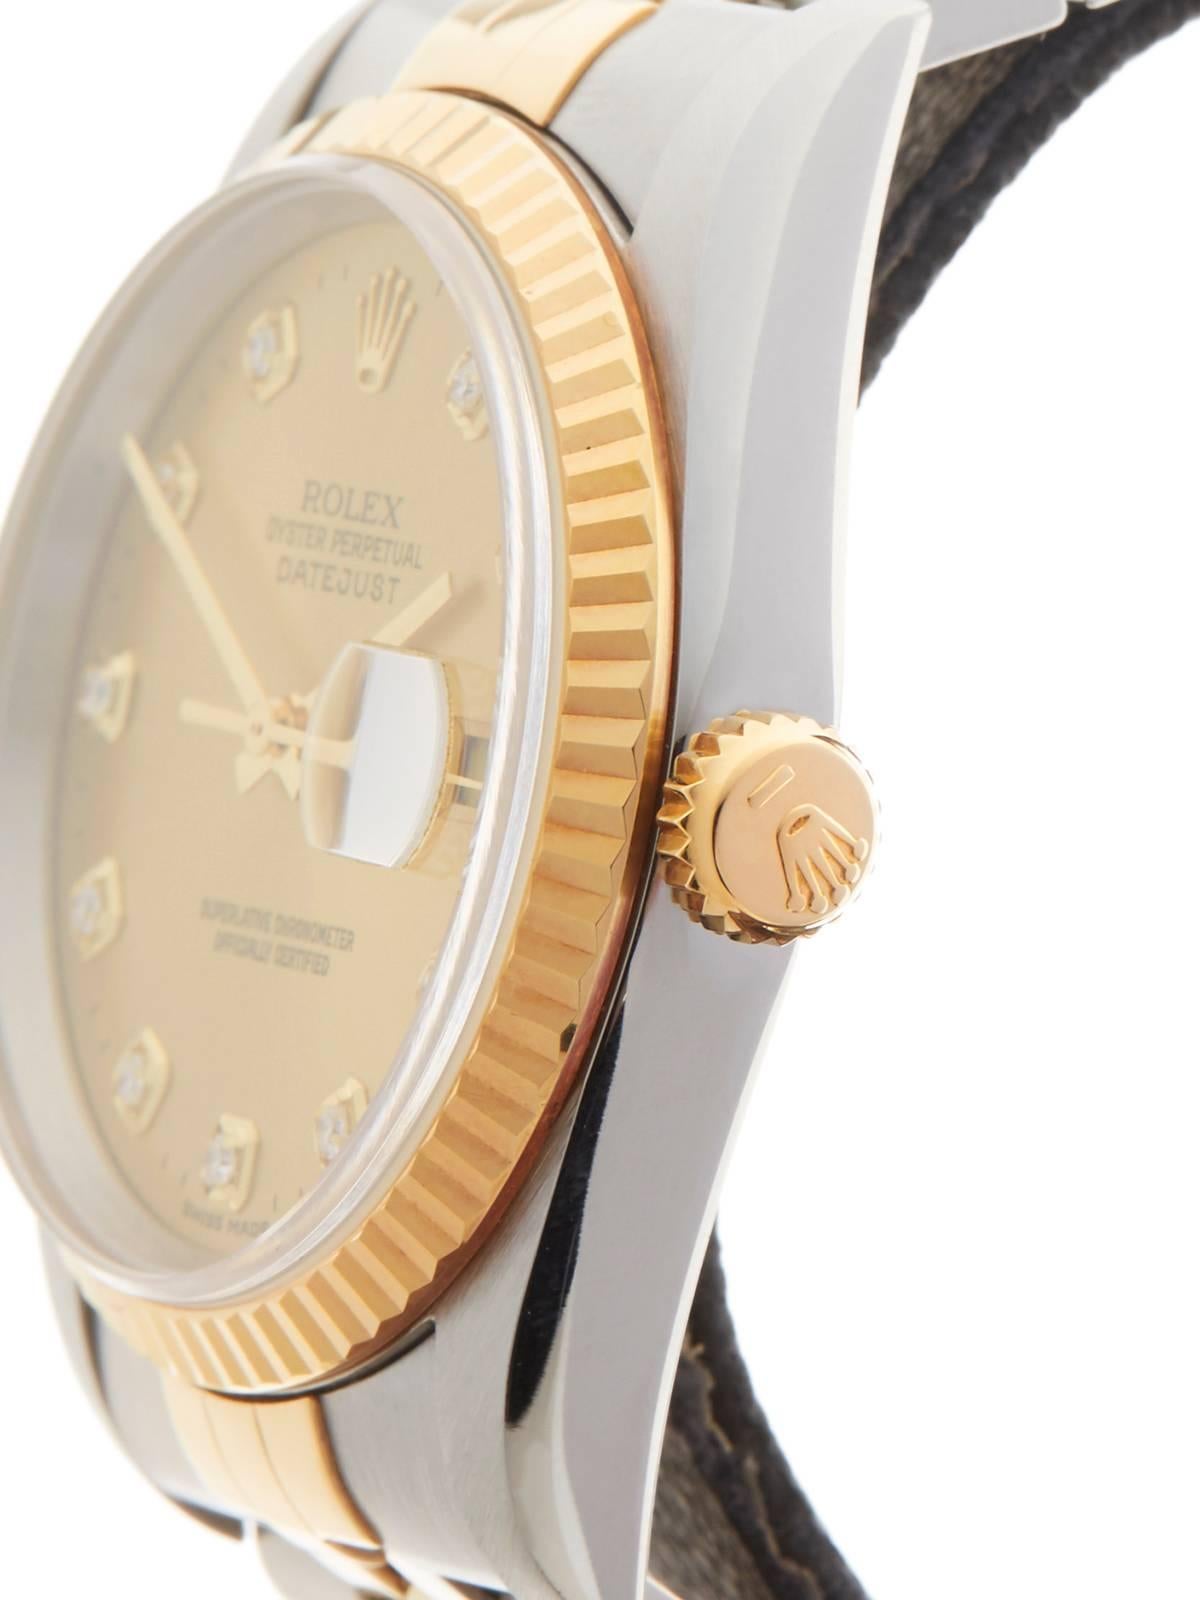 Women's or Men's Rolex Stainless Steel Yellow Gold Datejust Diamond Dial Automatic Wristwatch